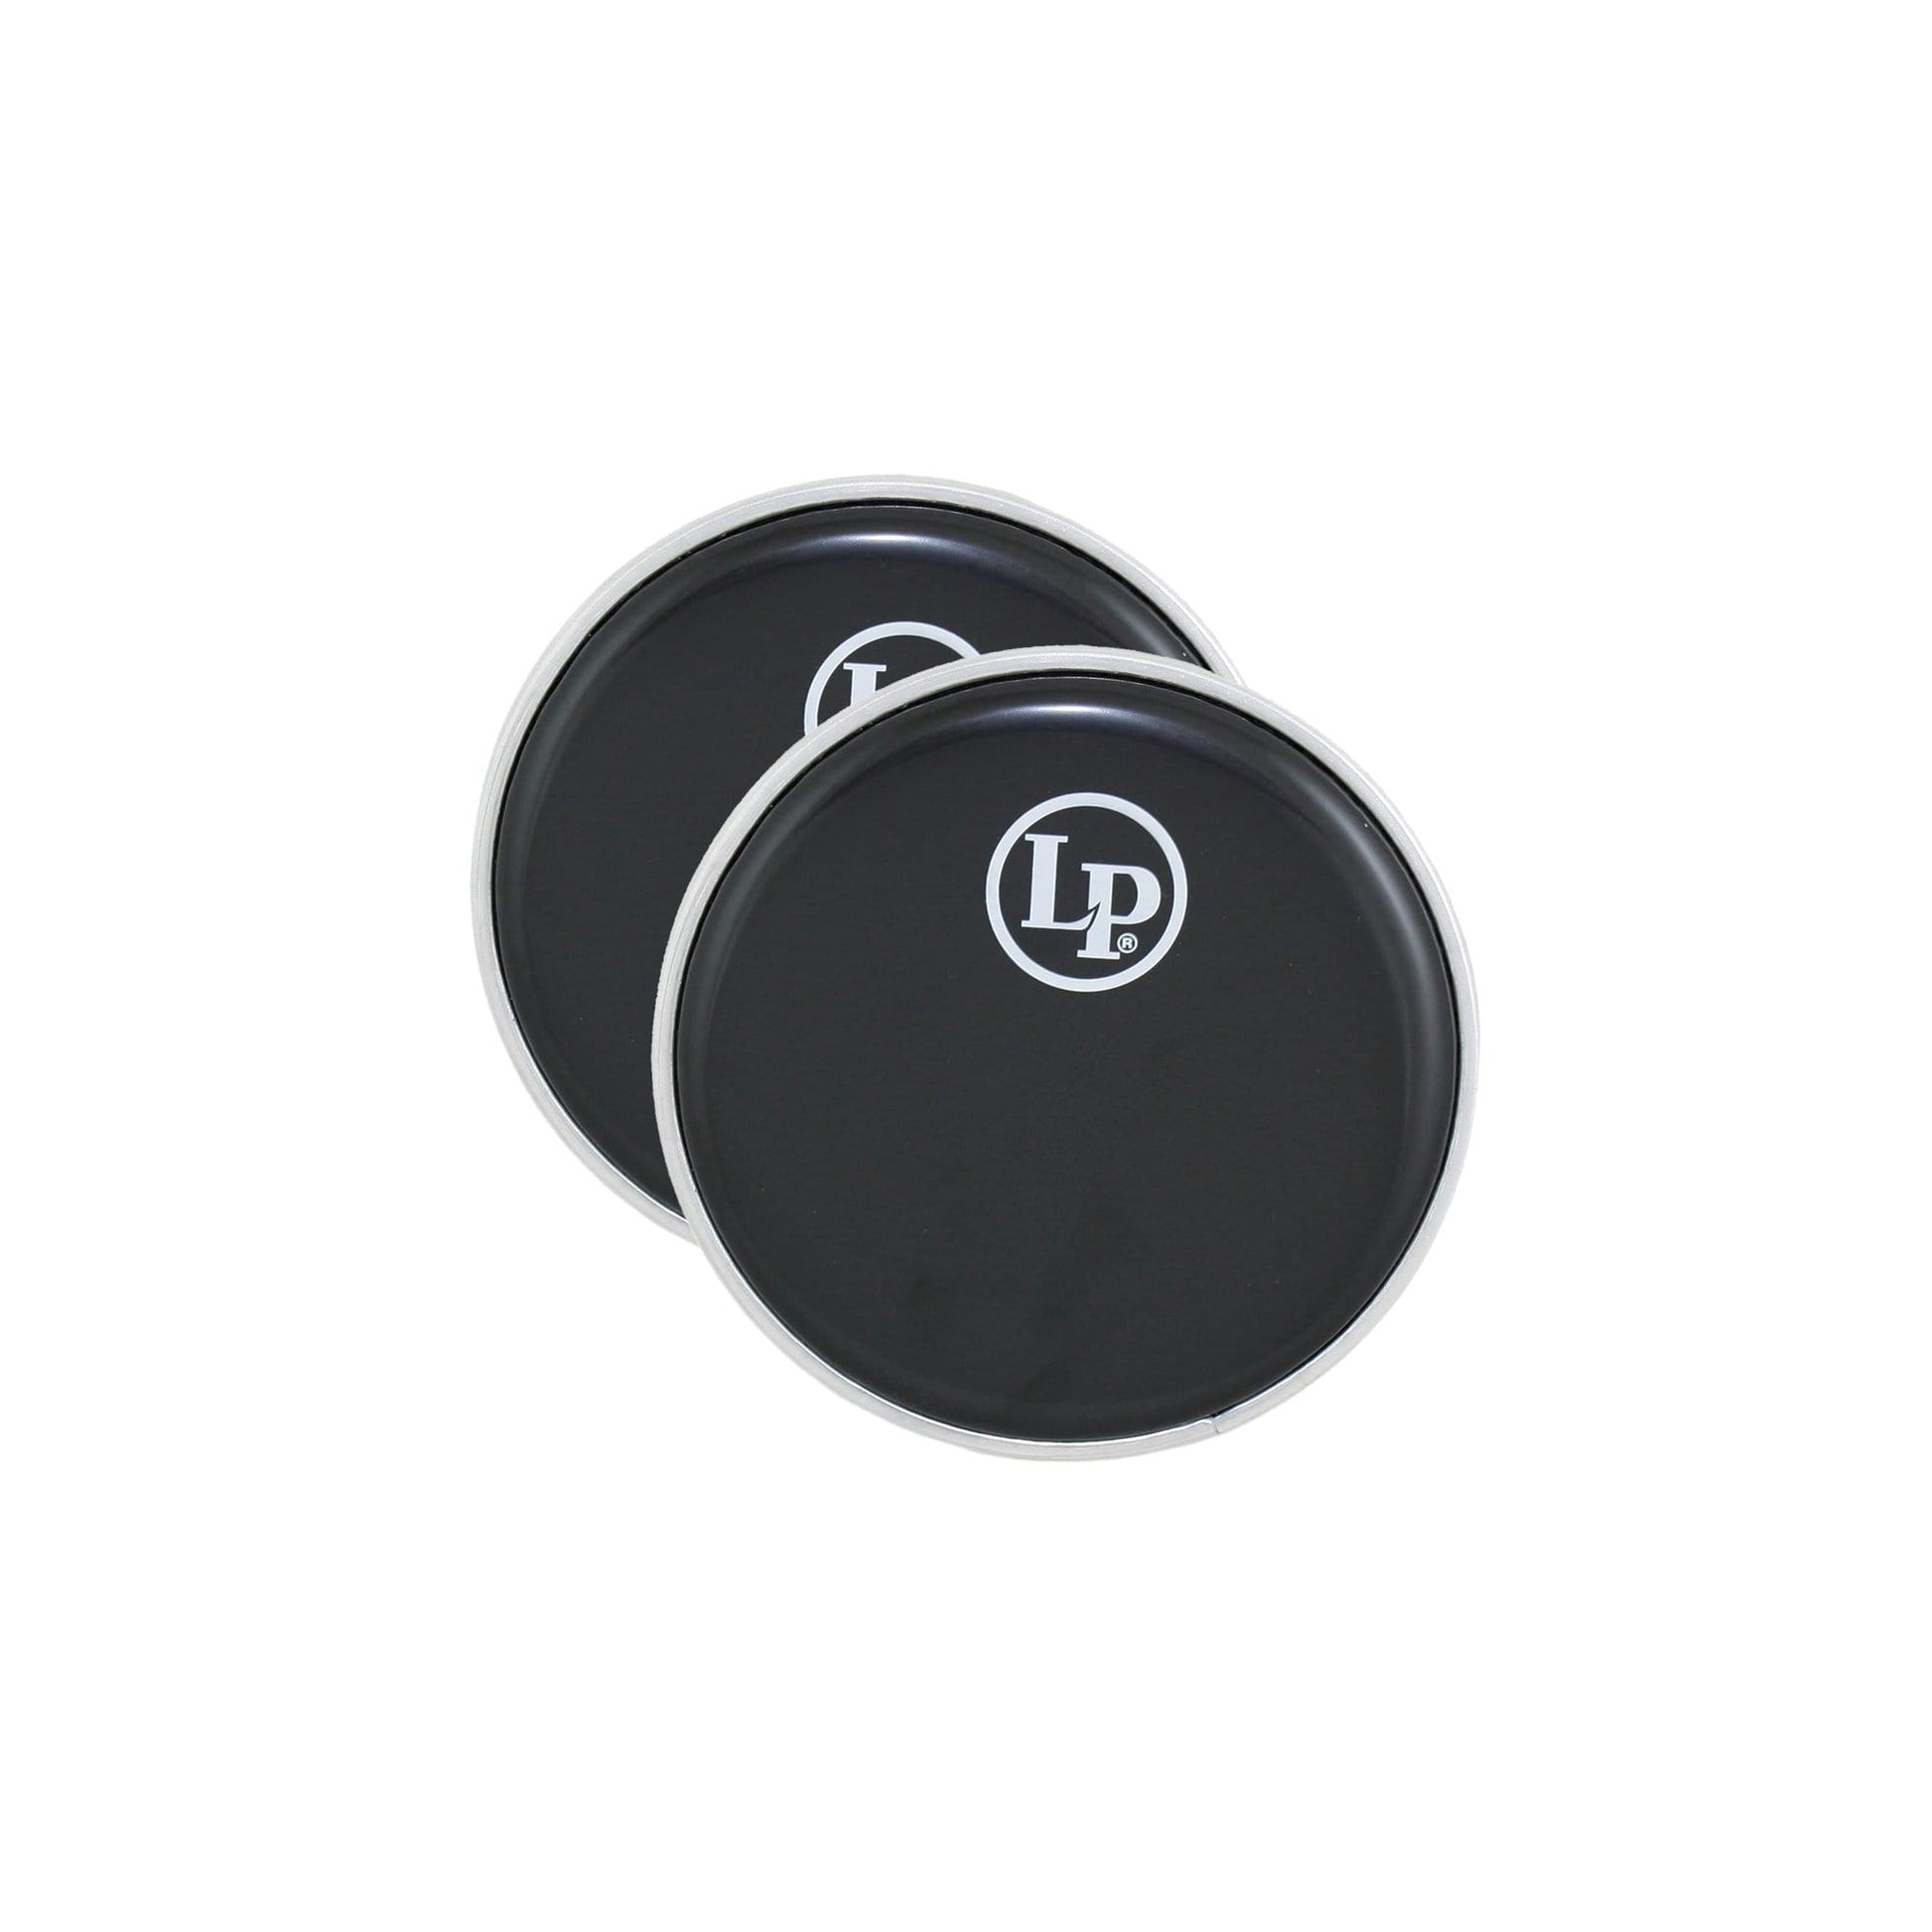 LP 6" Tambourim Head for Rio Tambourim (2 Pack Bundle) Drums and Percussion / Parts and Accessories / Heads